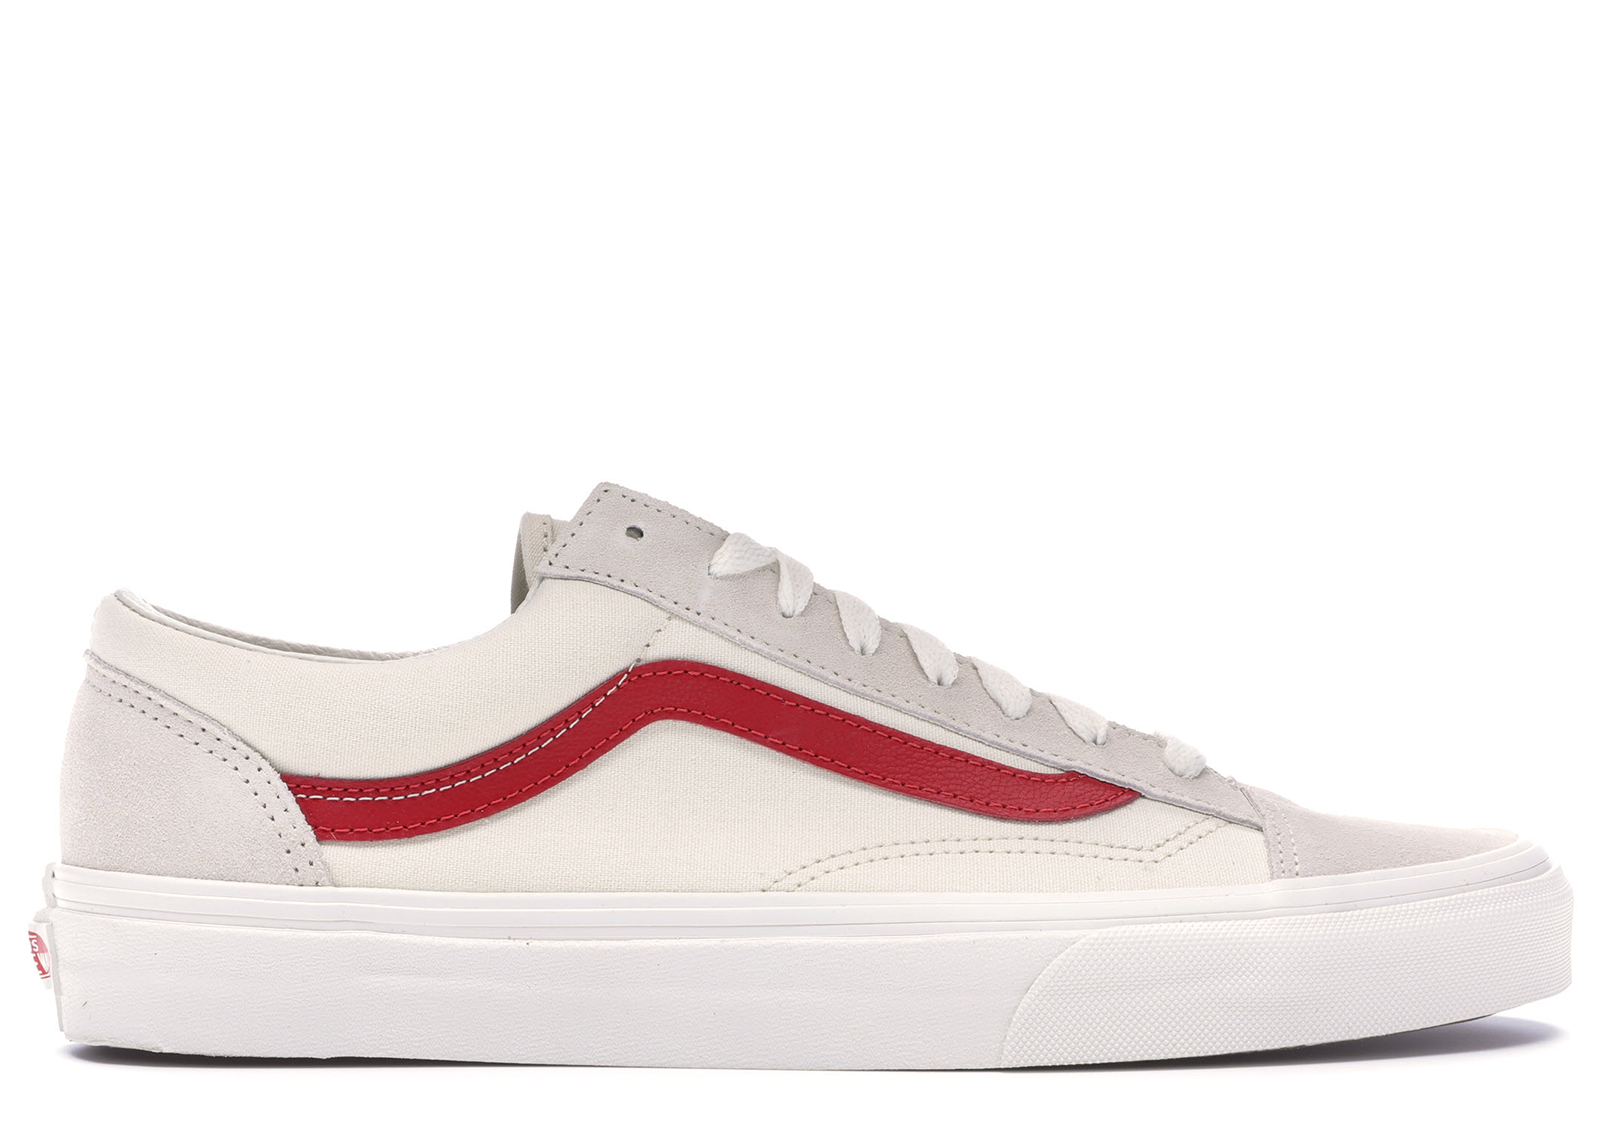 vans marshmallow red style 36